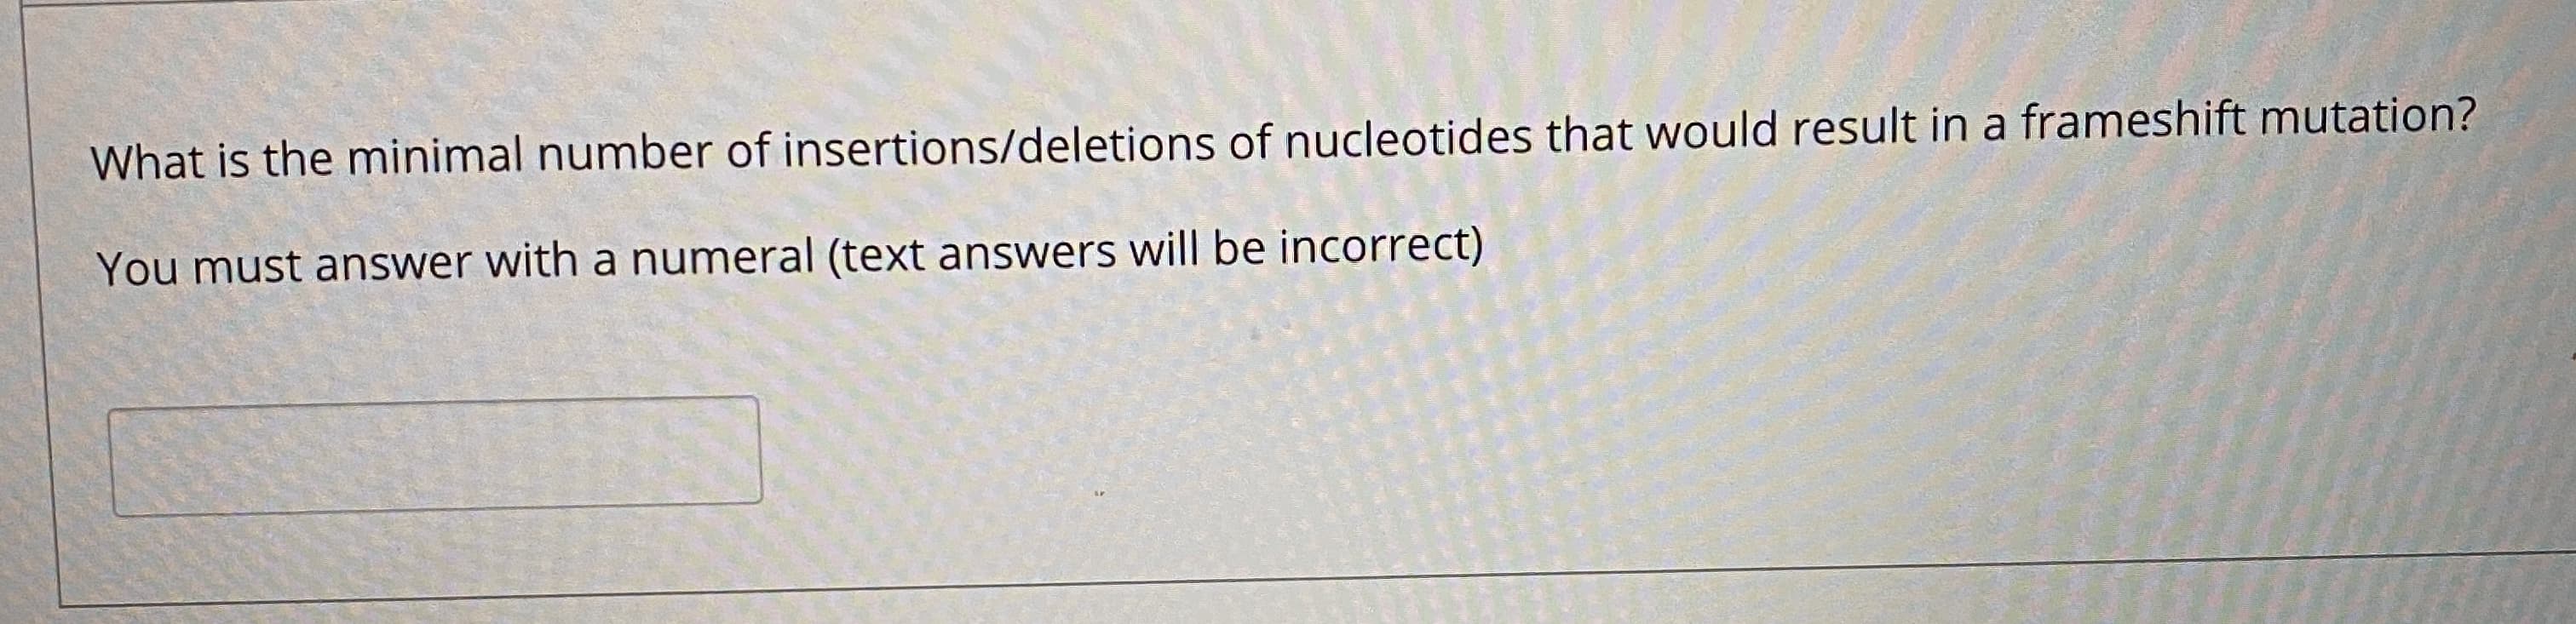 What is the minimal number of insertions/deletions of nucleotides that would result in a frameshift mutation?
